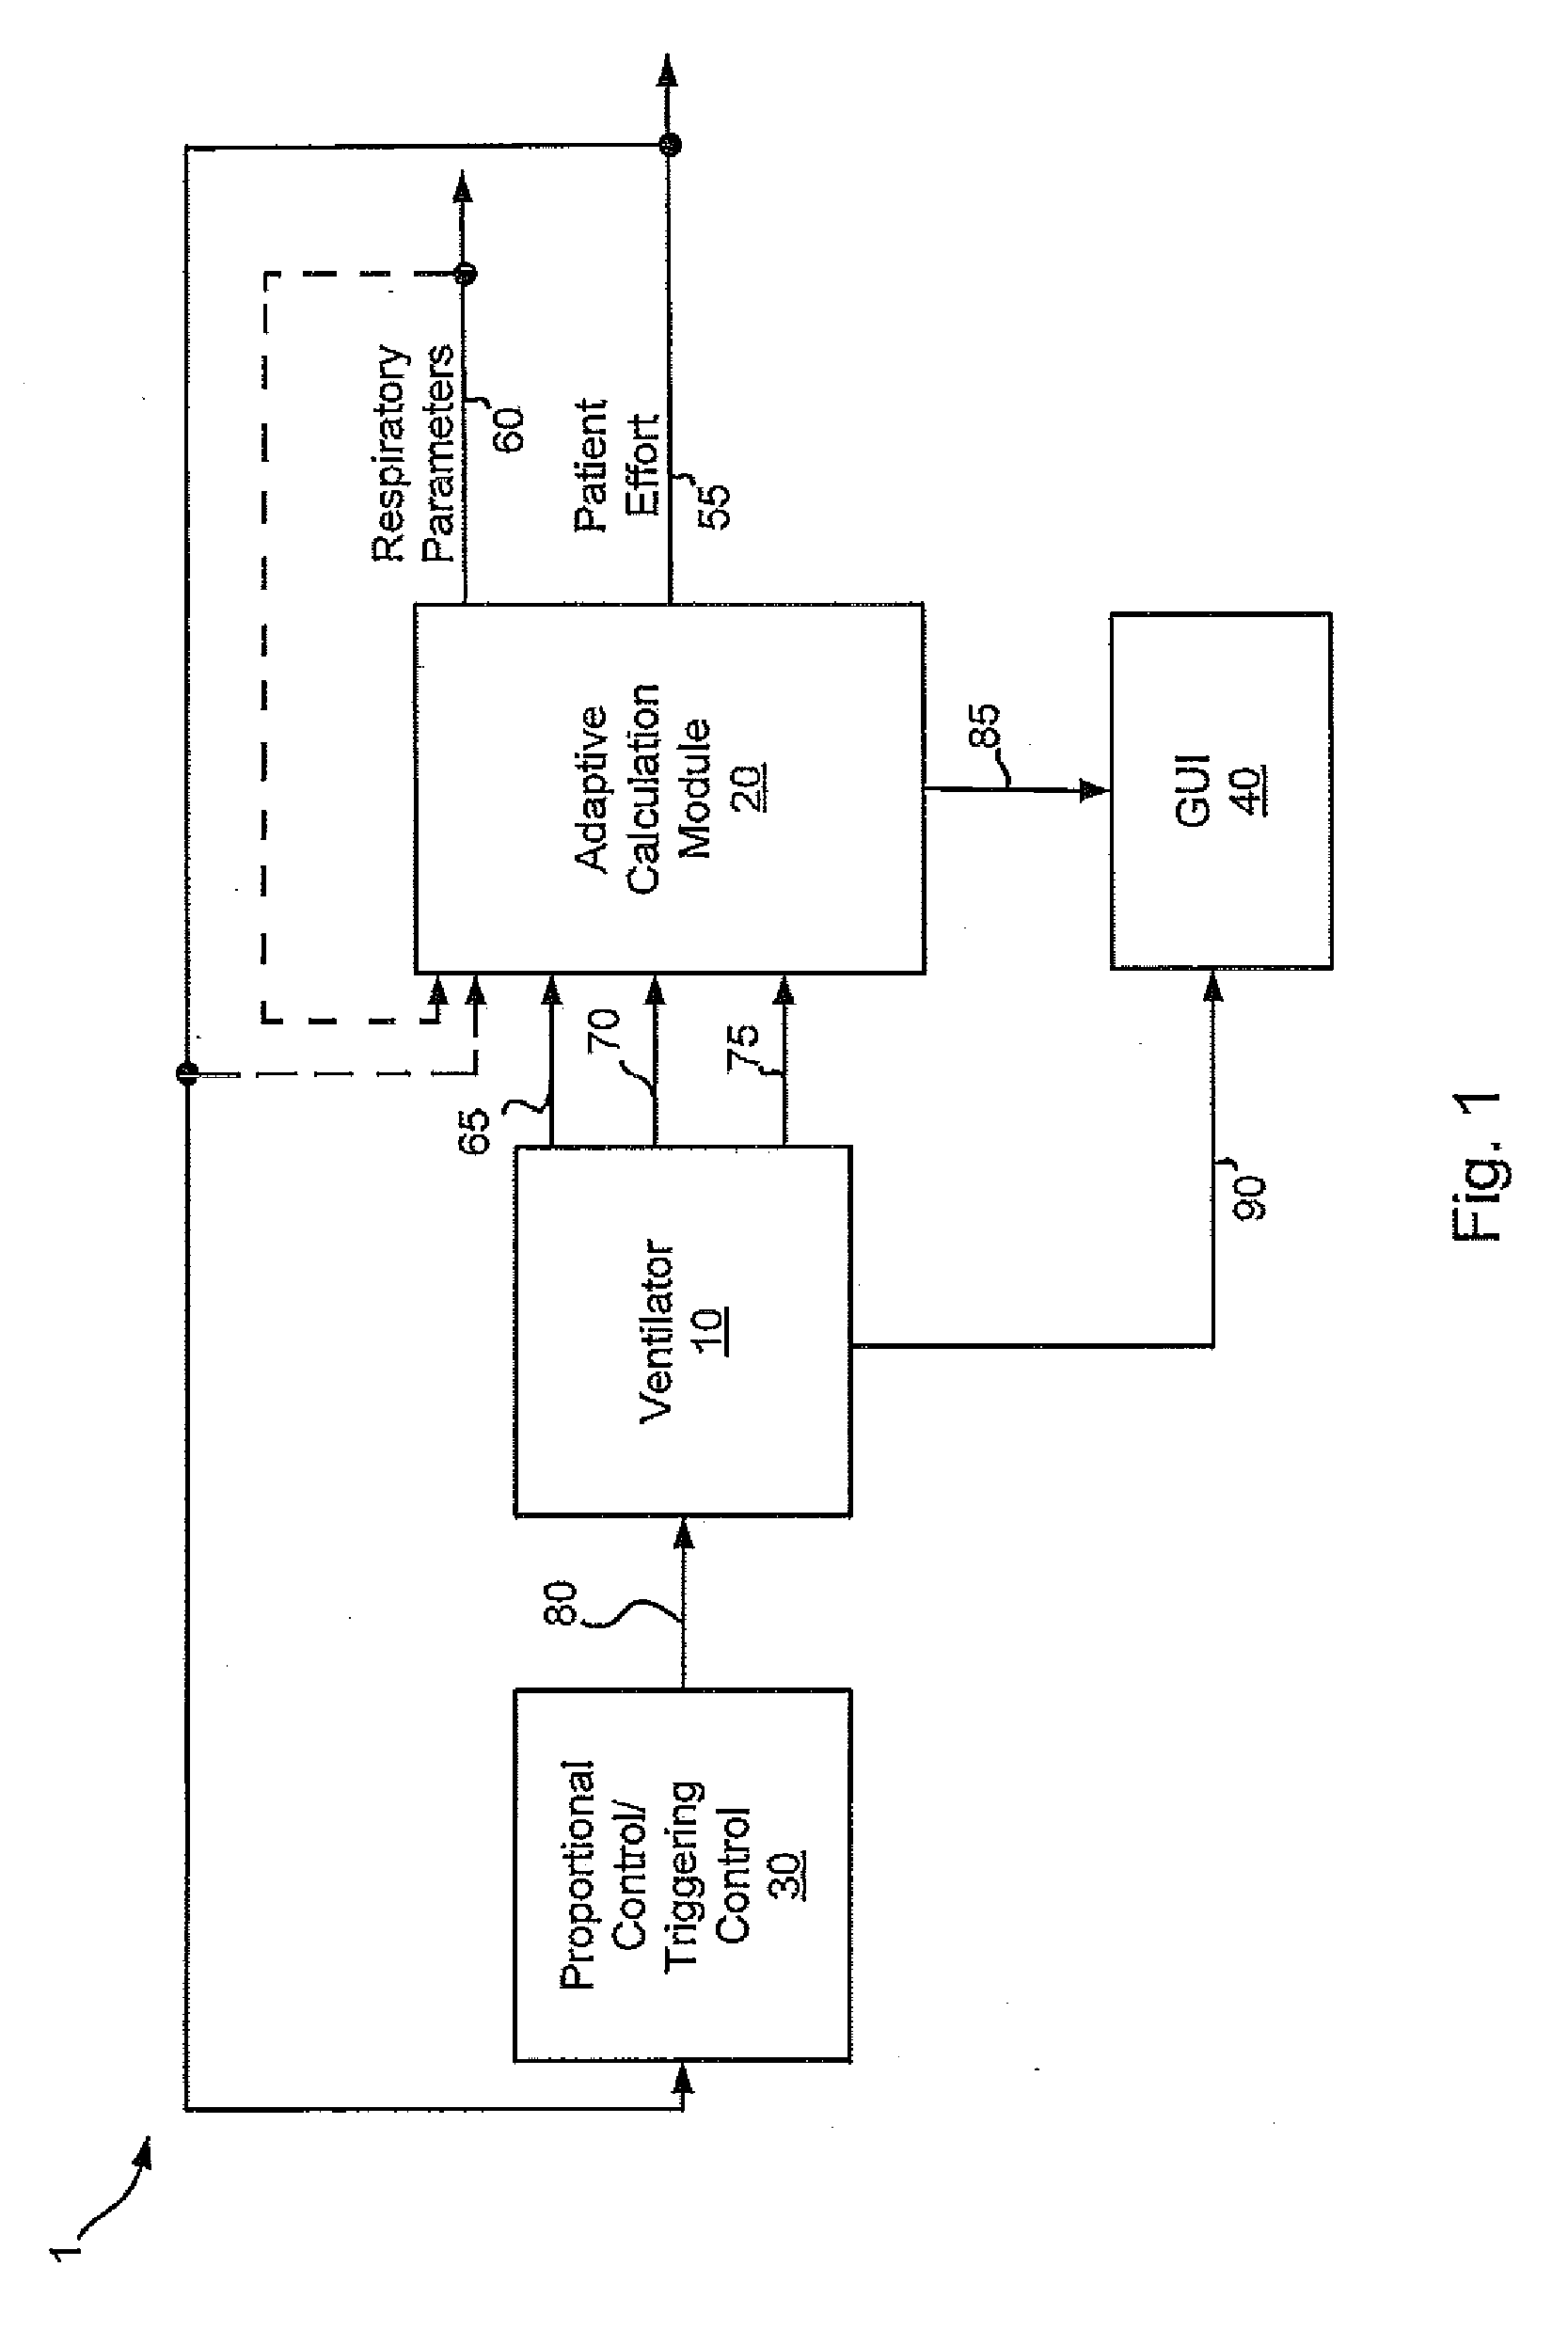 Systems and methods for triggering and cycling a ventilator based on reconstructed patient effort signal